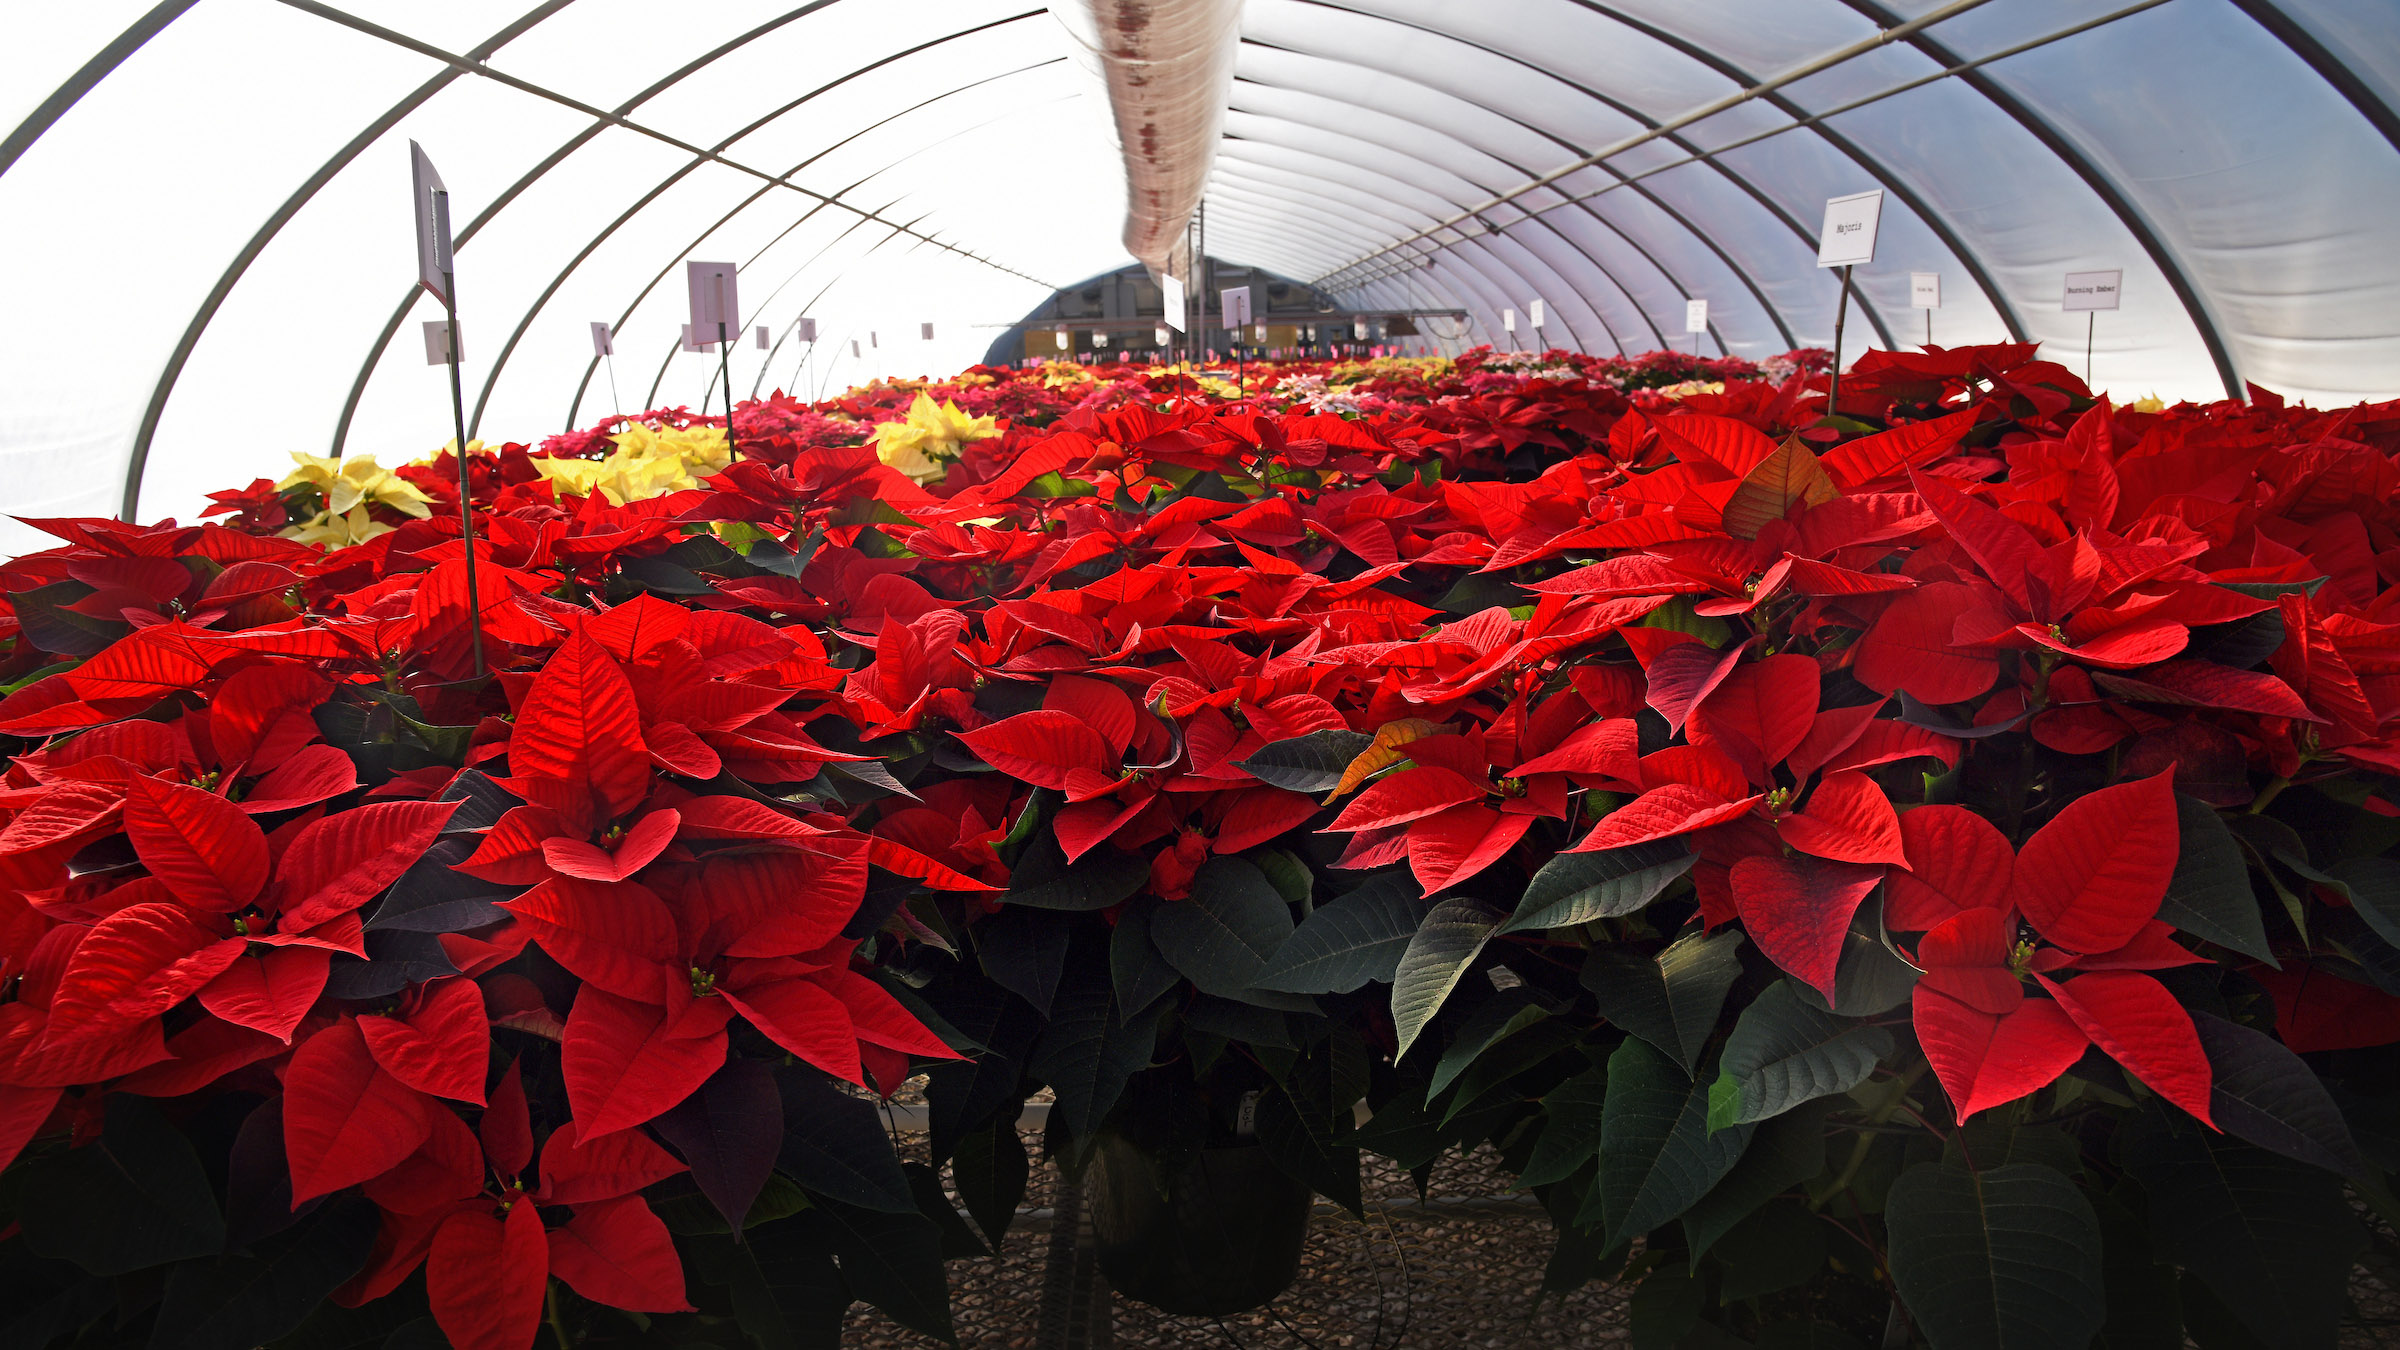 A sea of poinsettia plants at Poinsettia Field Day in NC State University's Raulston Arboretum greenhouse.